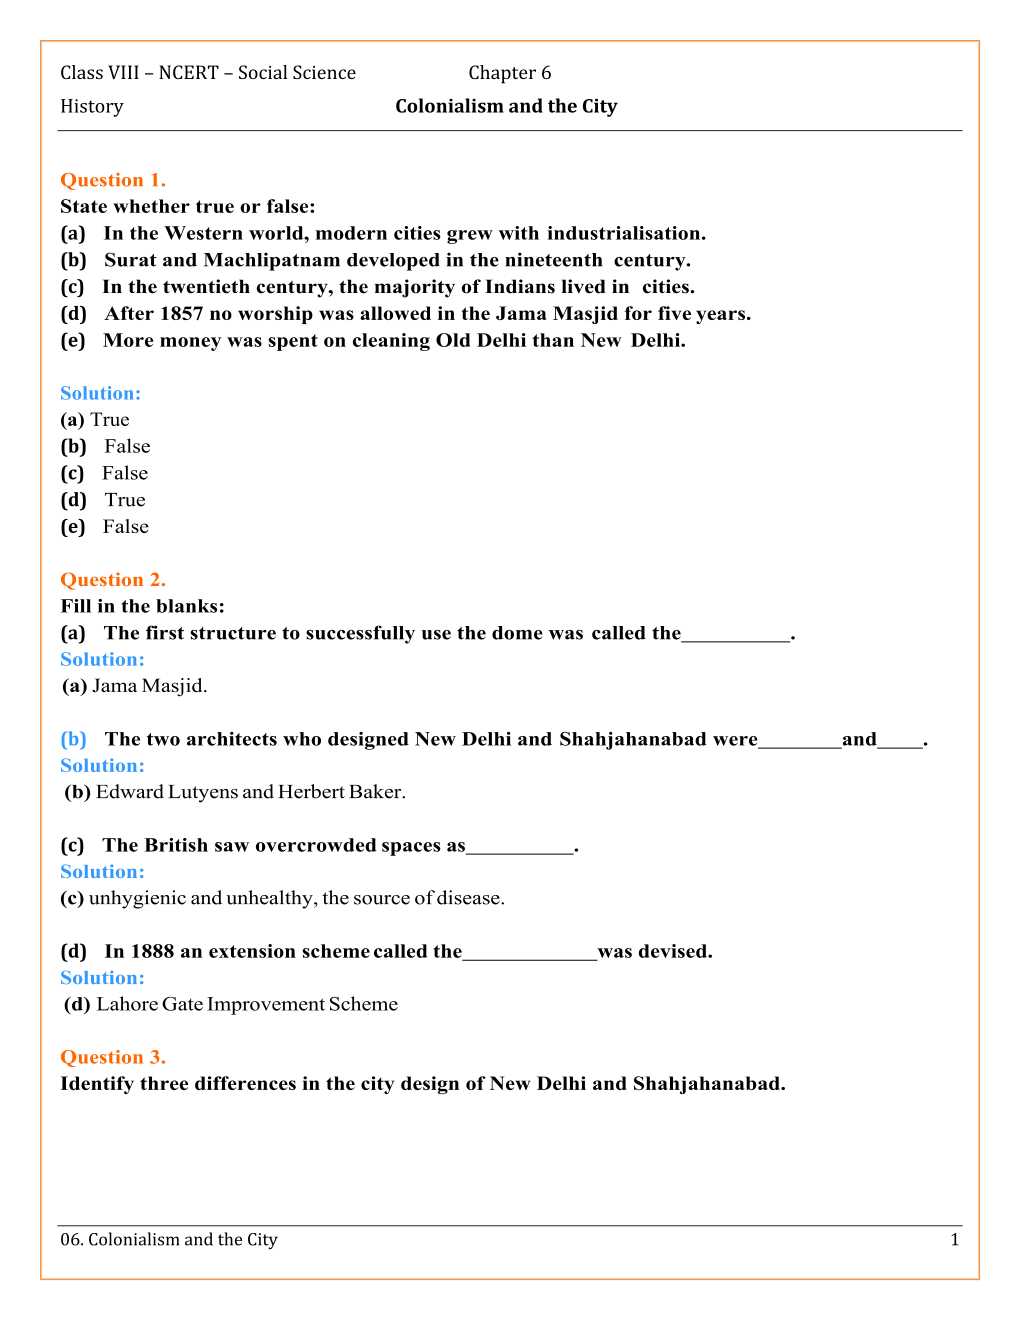 NCERT Solutions For Class 8 Social Science Our Pasts 3 Chapter 6